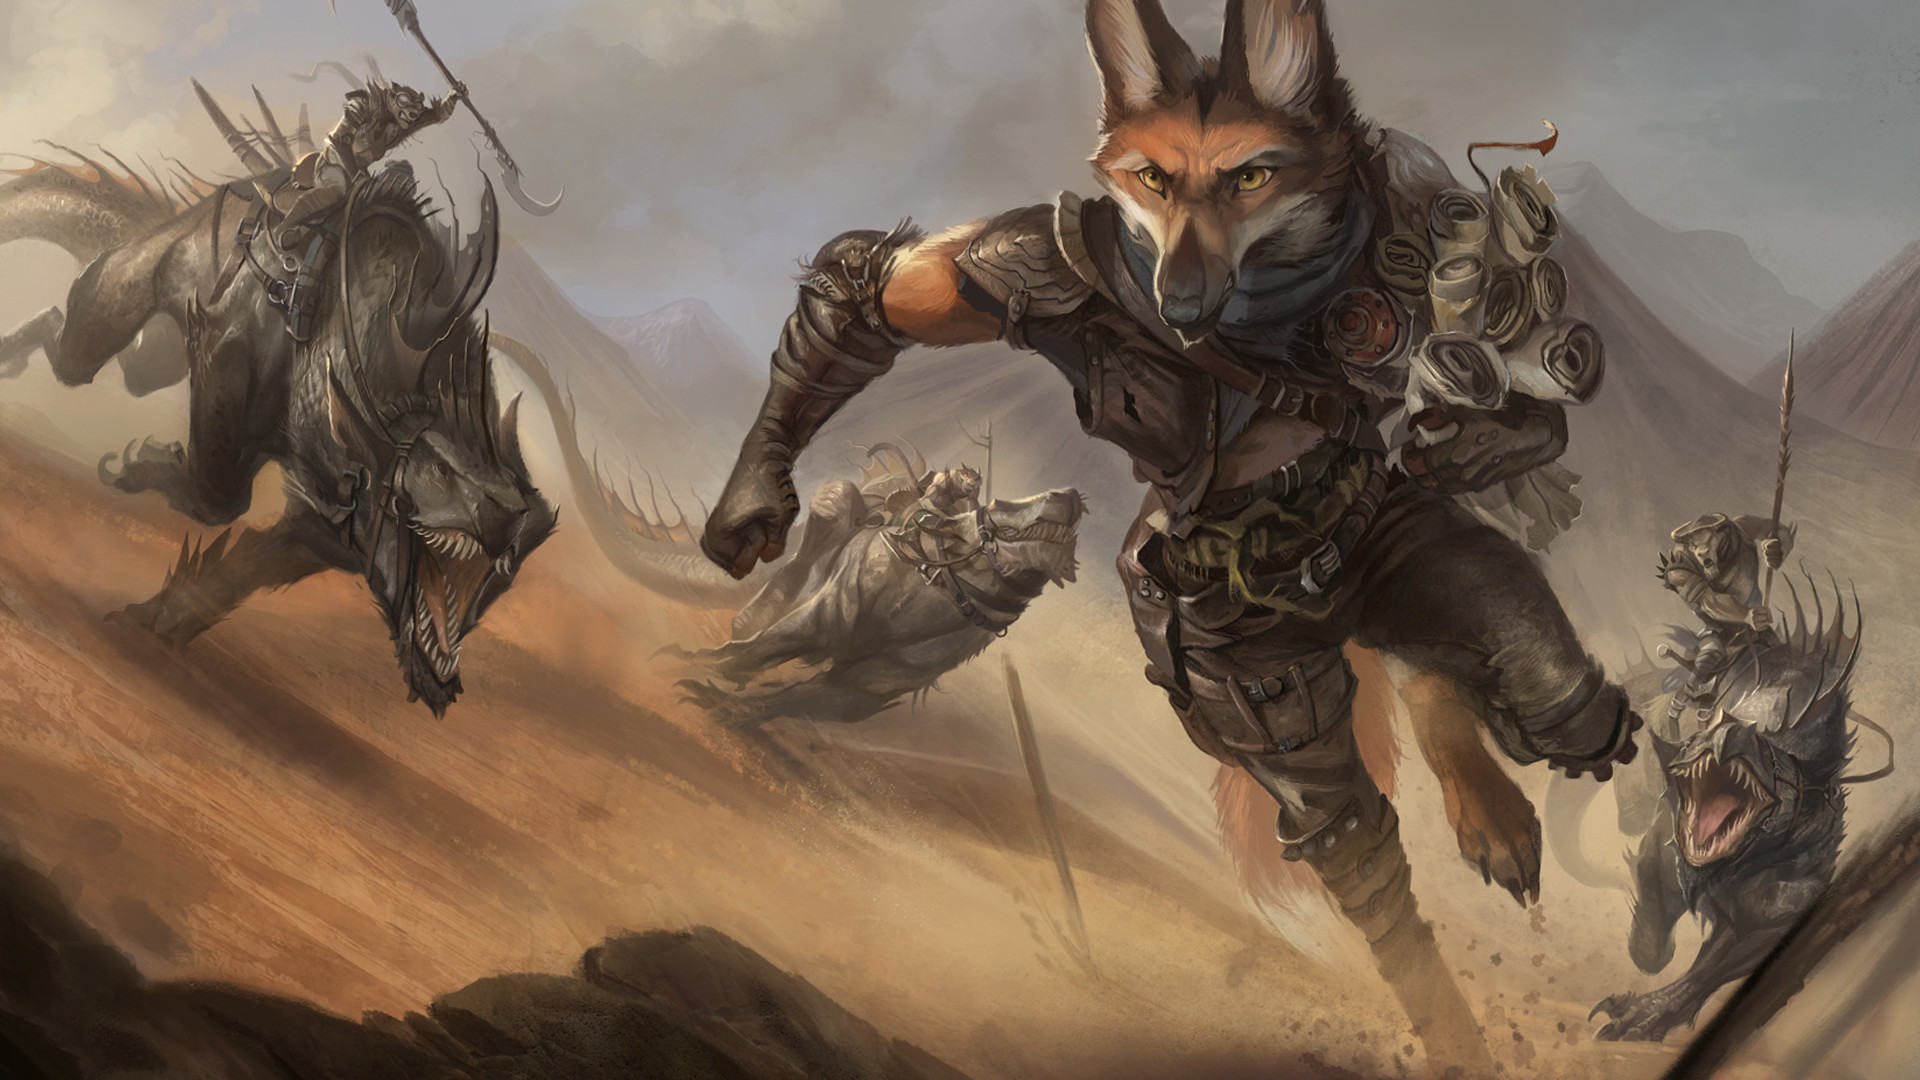 1920x1080 Running [AlectorFencer] [] Need #iPhone #6S #Plus #Wallpaper/  #Background for #IPhone6SPlus? Follow iPhone 6S Plus 3Wallpapers/  #Backgroun…